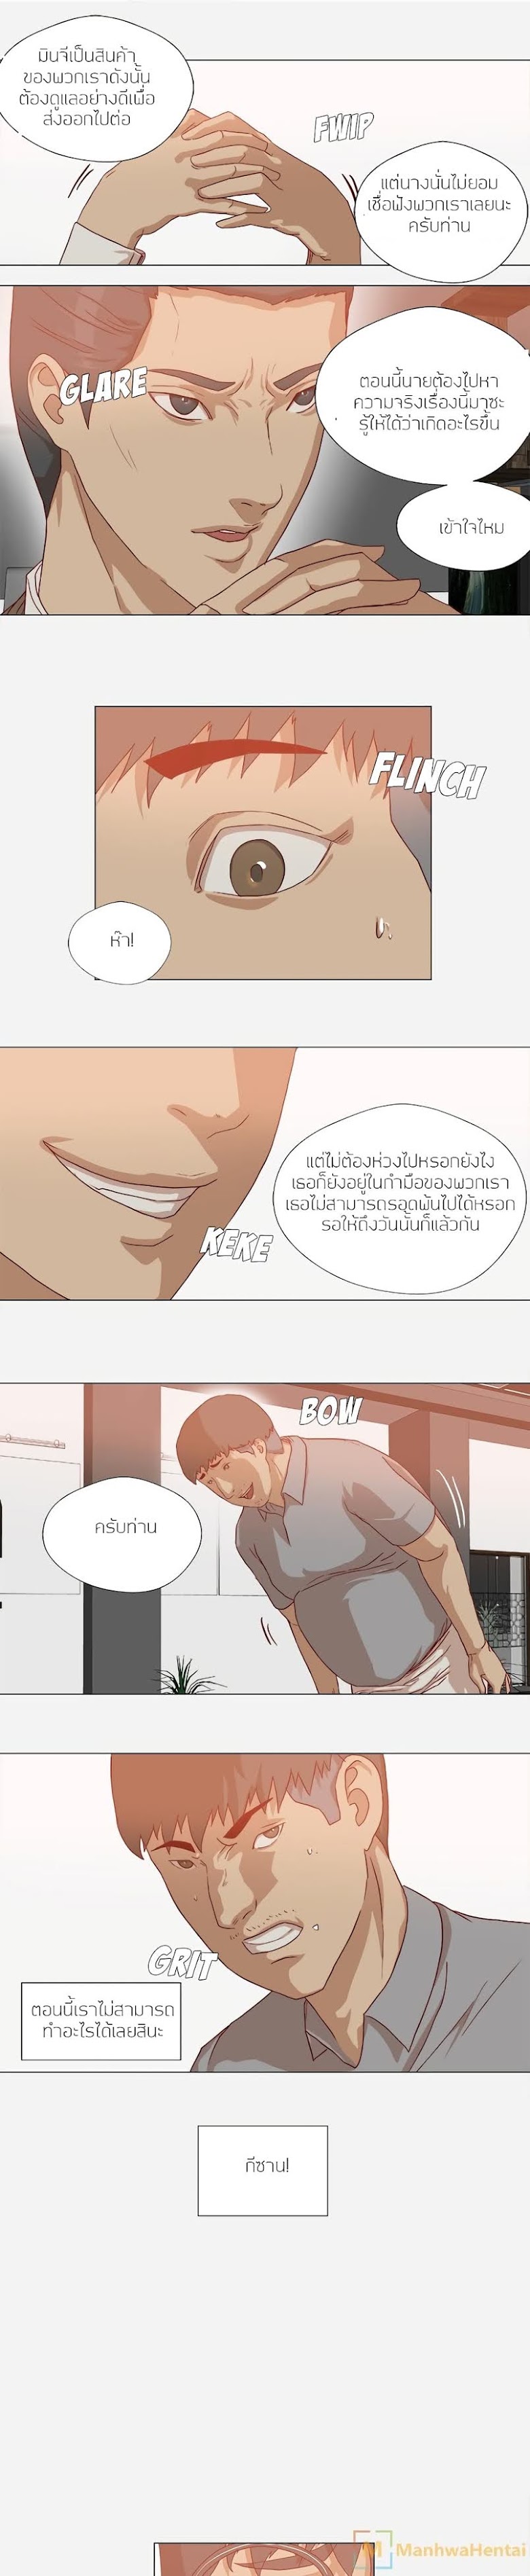 The Good Manager - หน้า 9